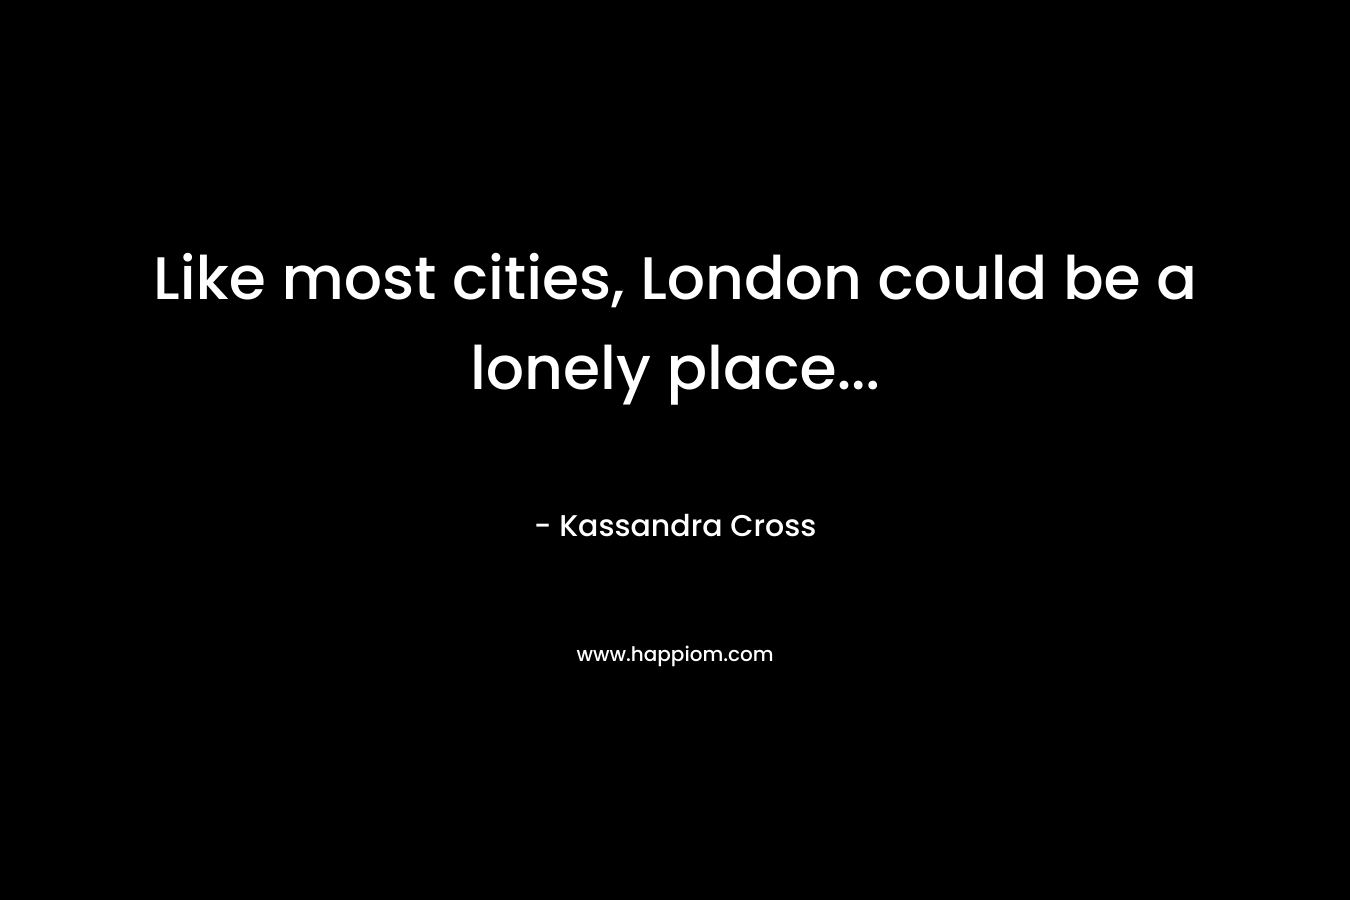 Like most cities, London could be a lonely place...